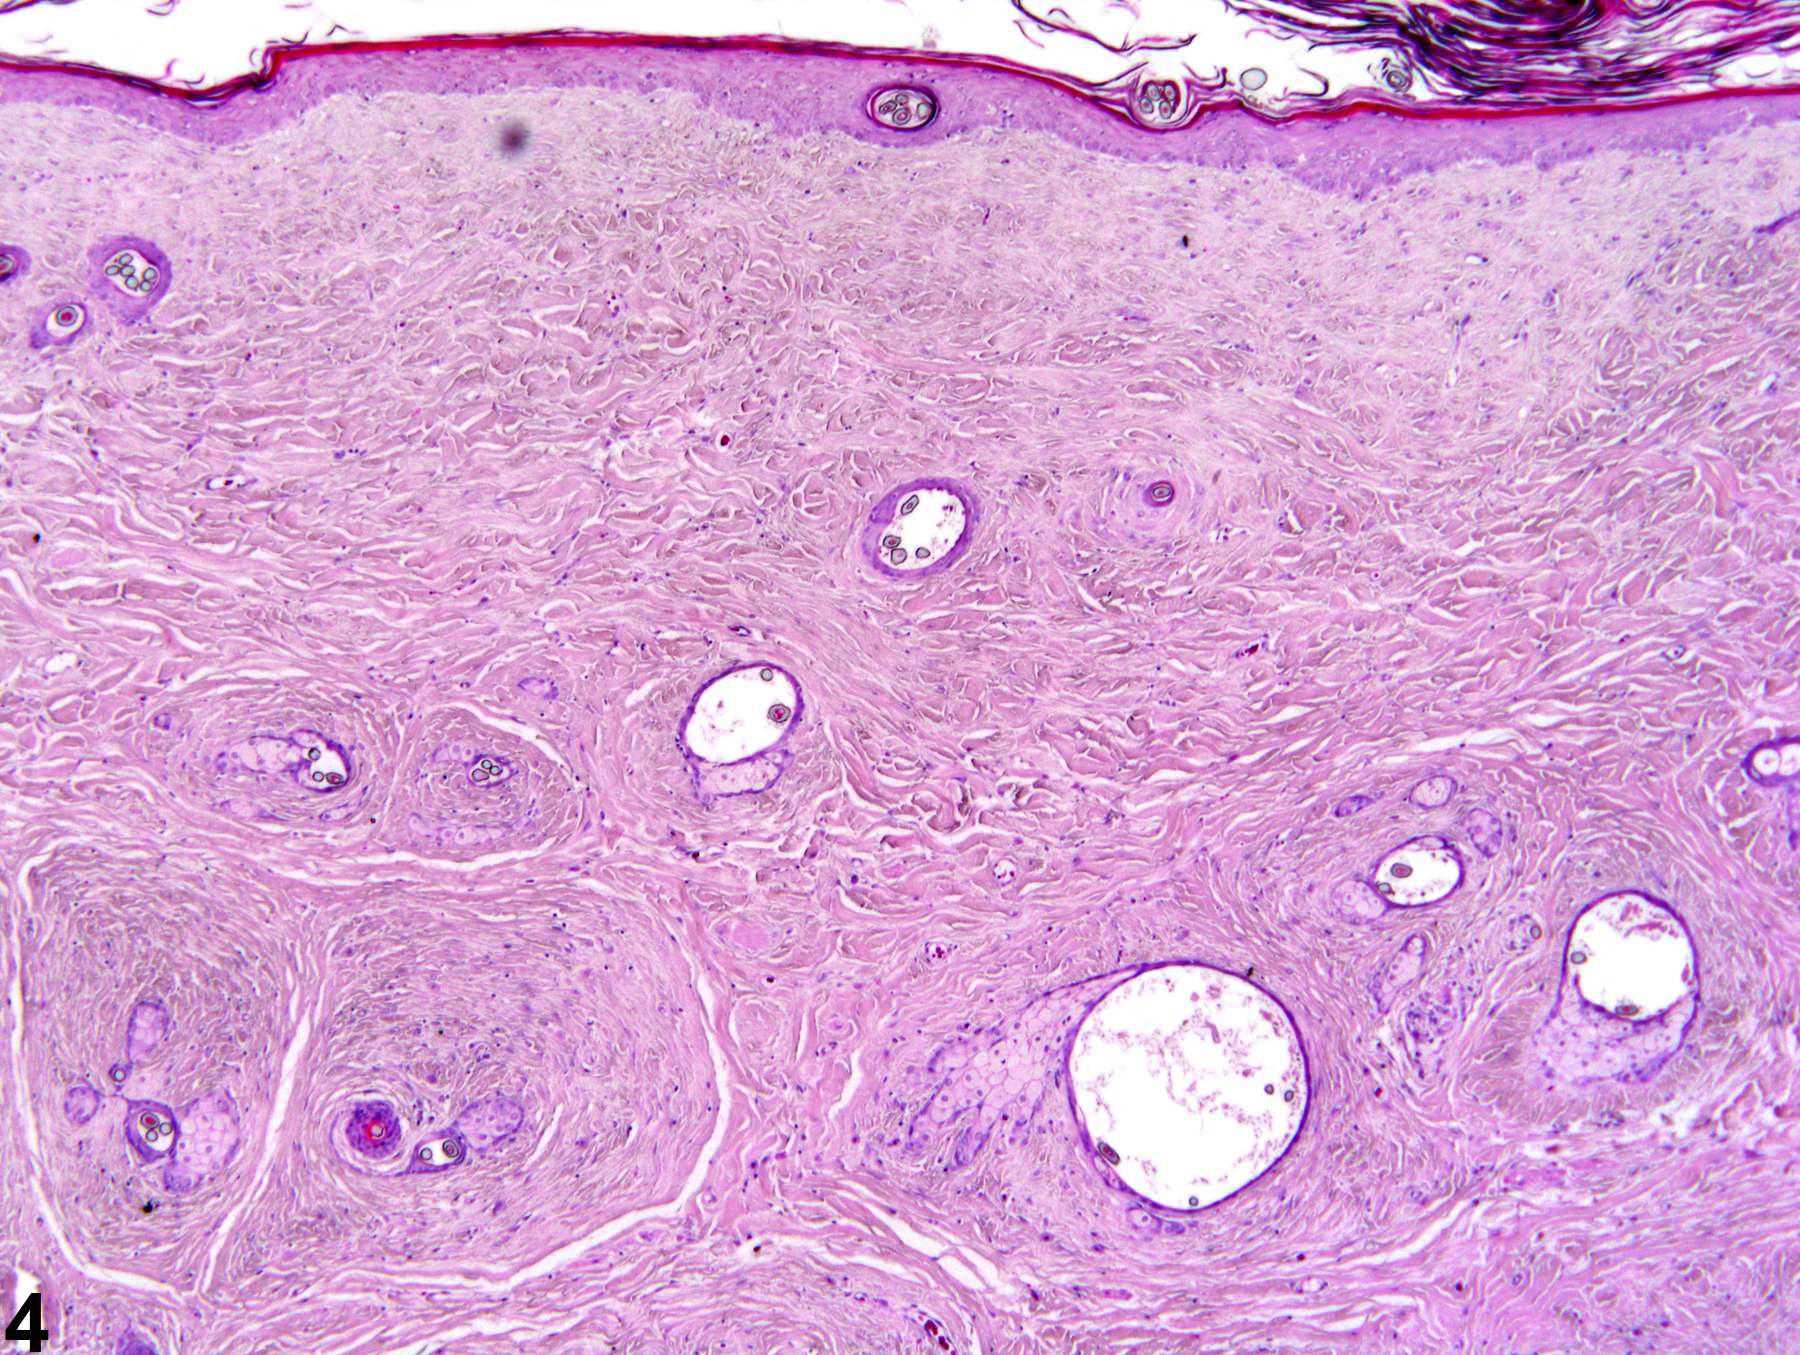 Image of fibroadnexal hamartoma in the skin from a male F344/N rat in a chronic study